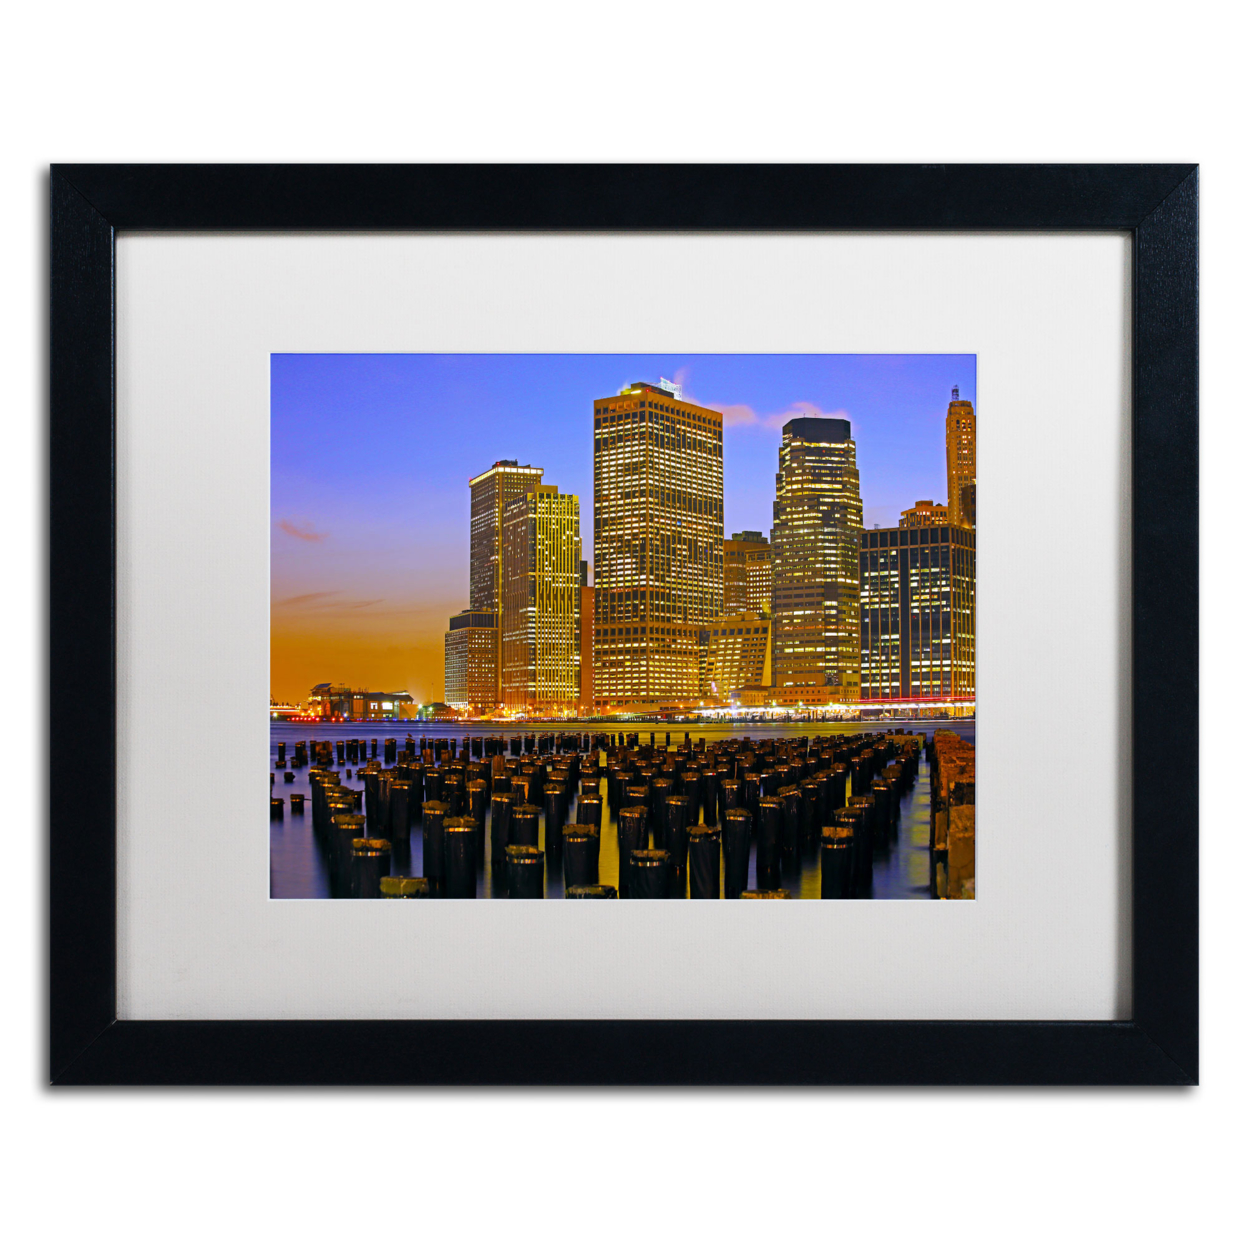 CATeyes 'City Lights 2' Black Wooden Framed Art 18 X 22 Inches